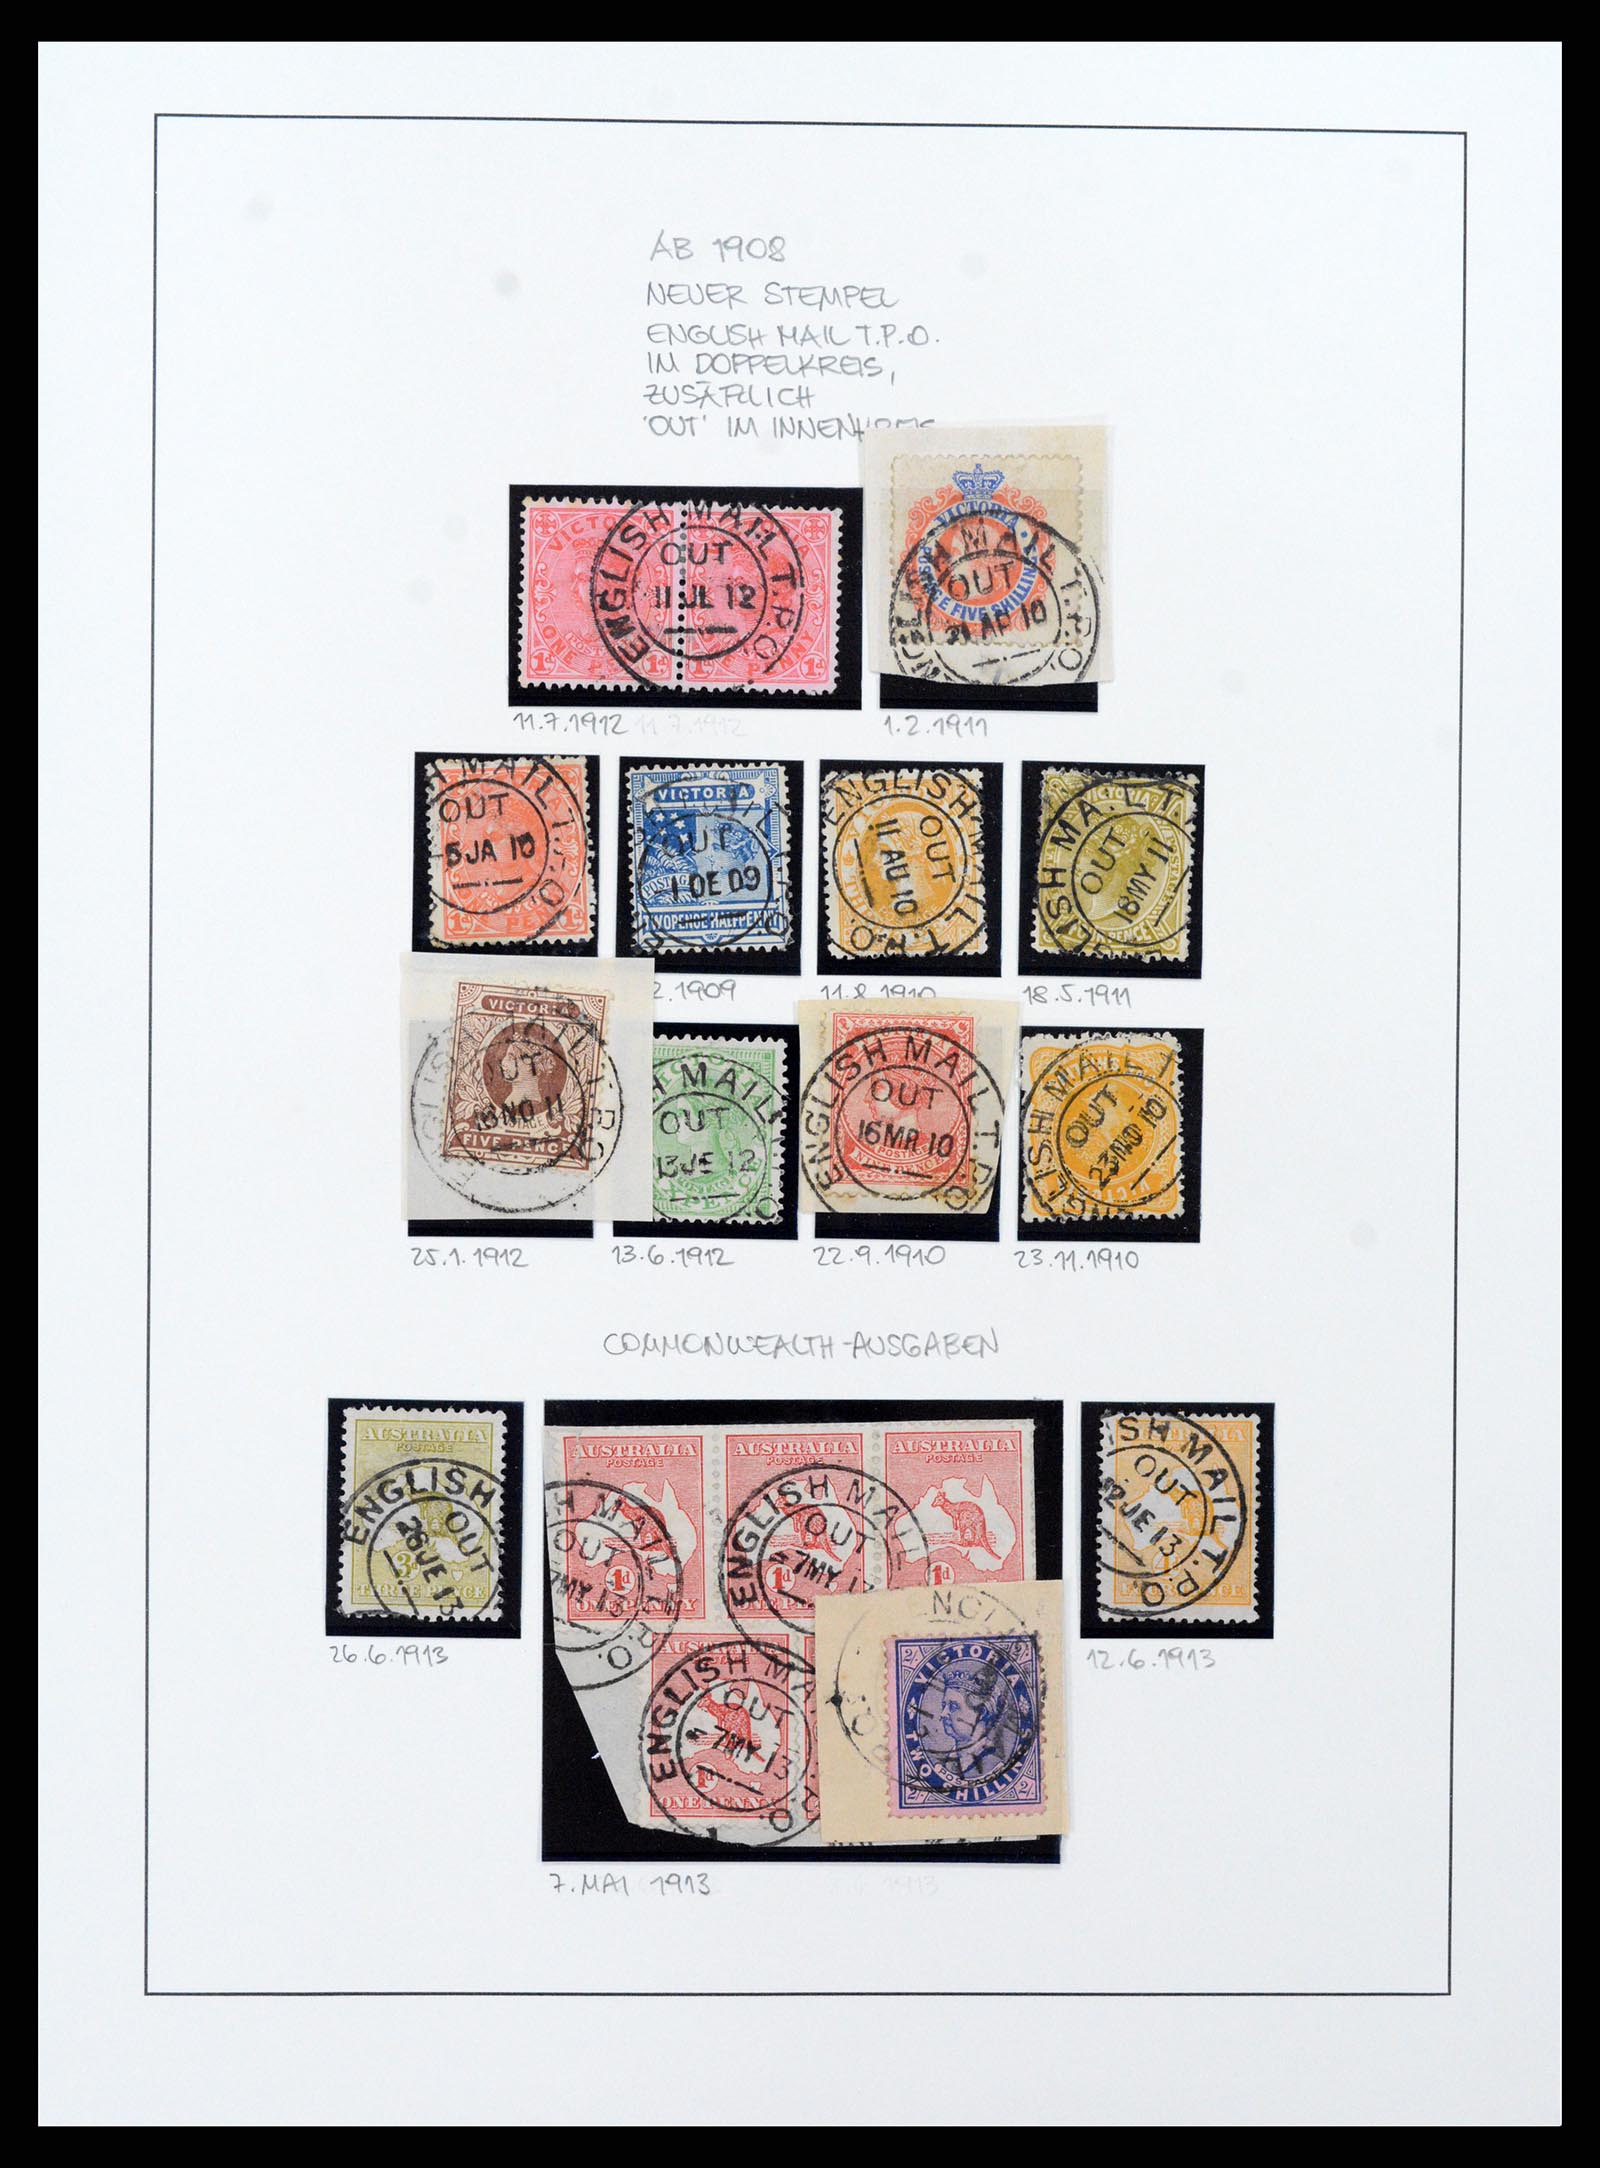 37514 026 - Stamp collection 37514 Victoria tpo cancellations 1865-1930.